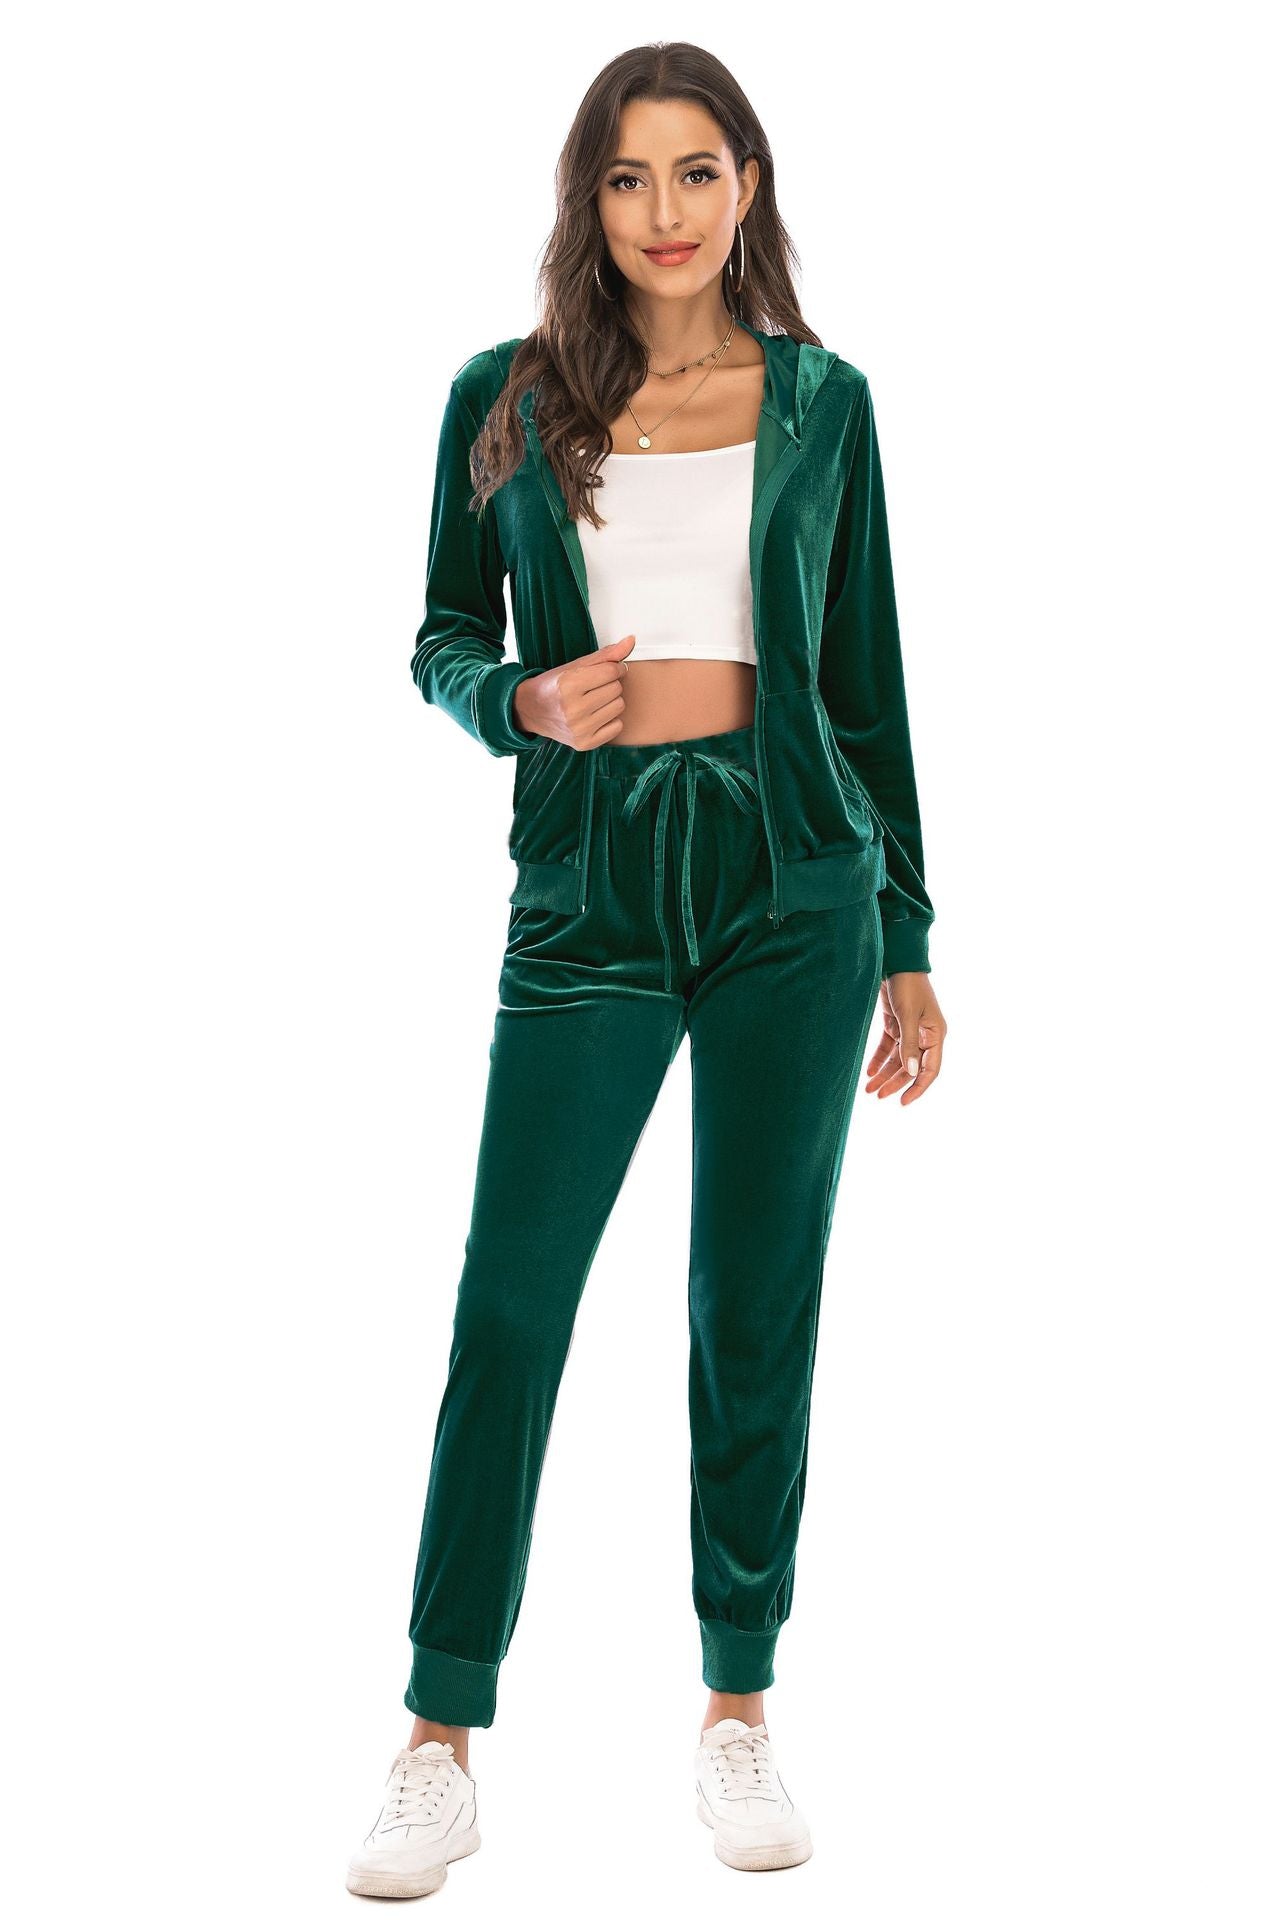 Fashion Casual Spring Sports Suits for Women-Sports Suits-Green-S-Free Shipping Leatheretro